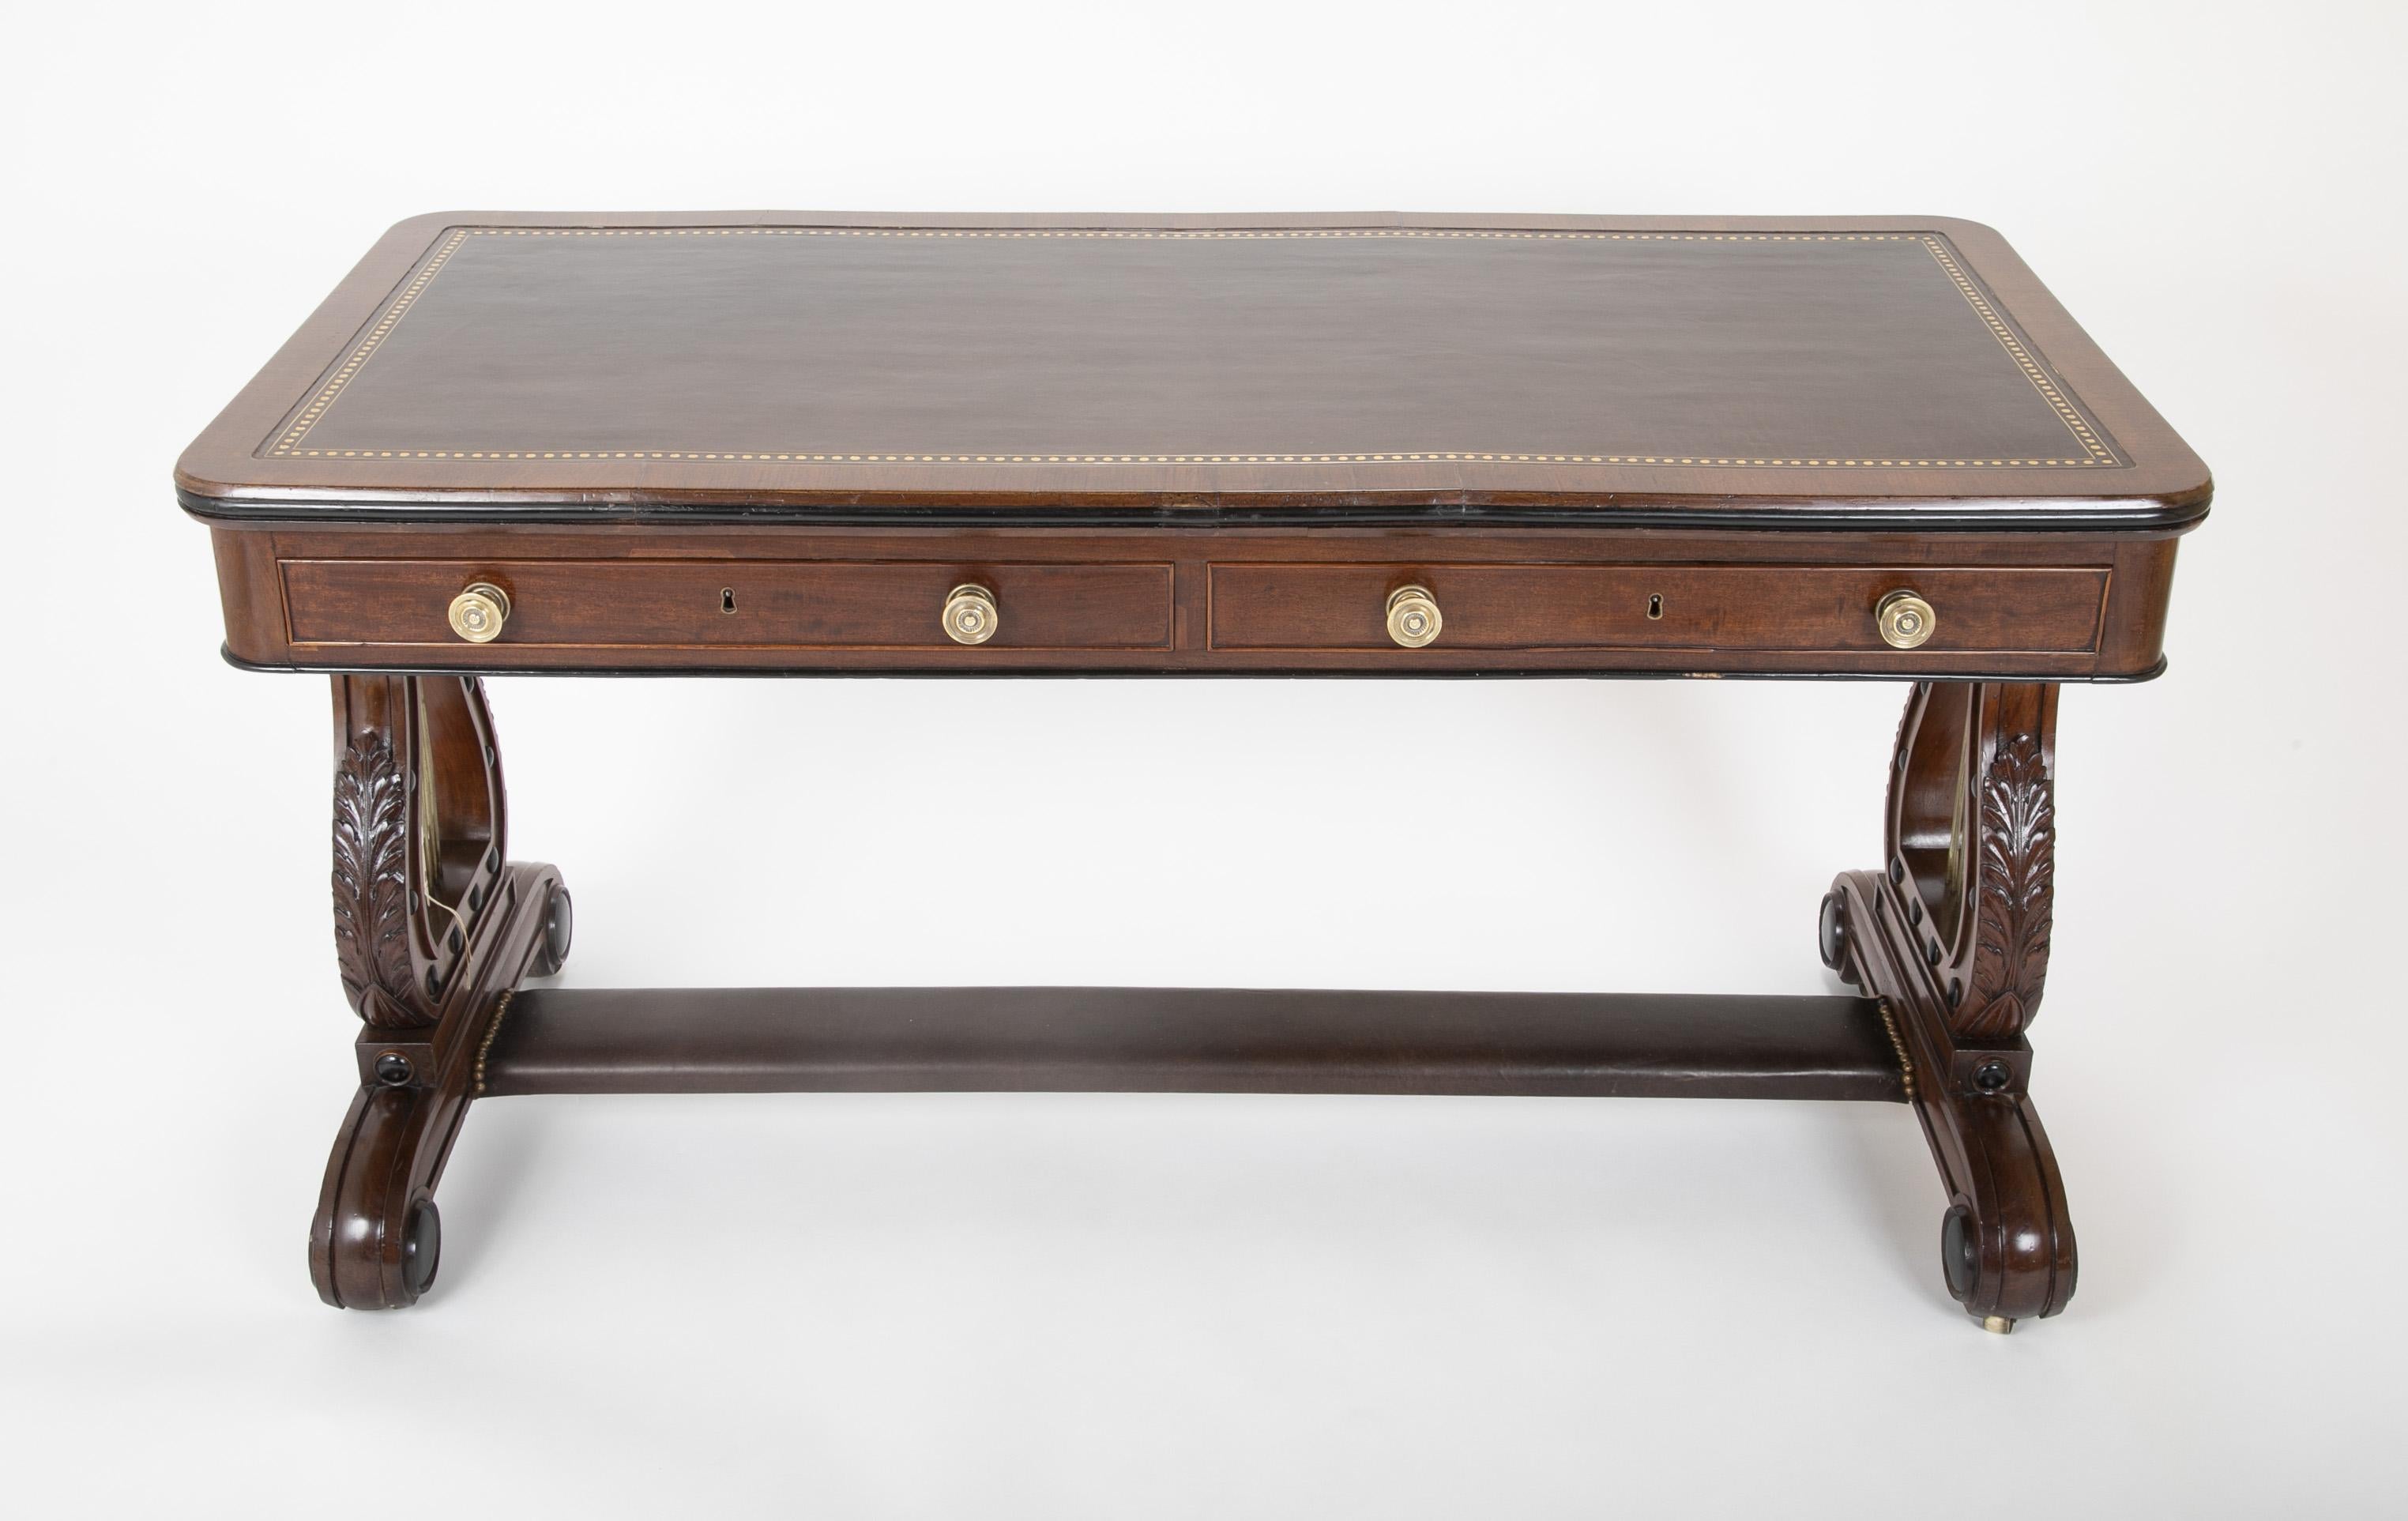 A striking English Regency mahogany sofa / writing table with lyre ends and ebonized detailing. Stretcher and desk top newly covered with leather, circa 1820.

Measures: 29.75